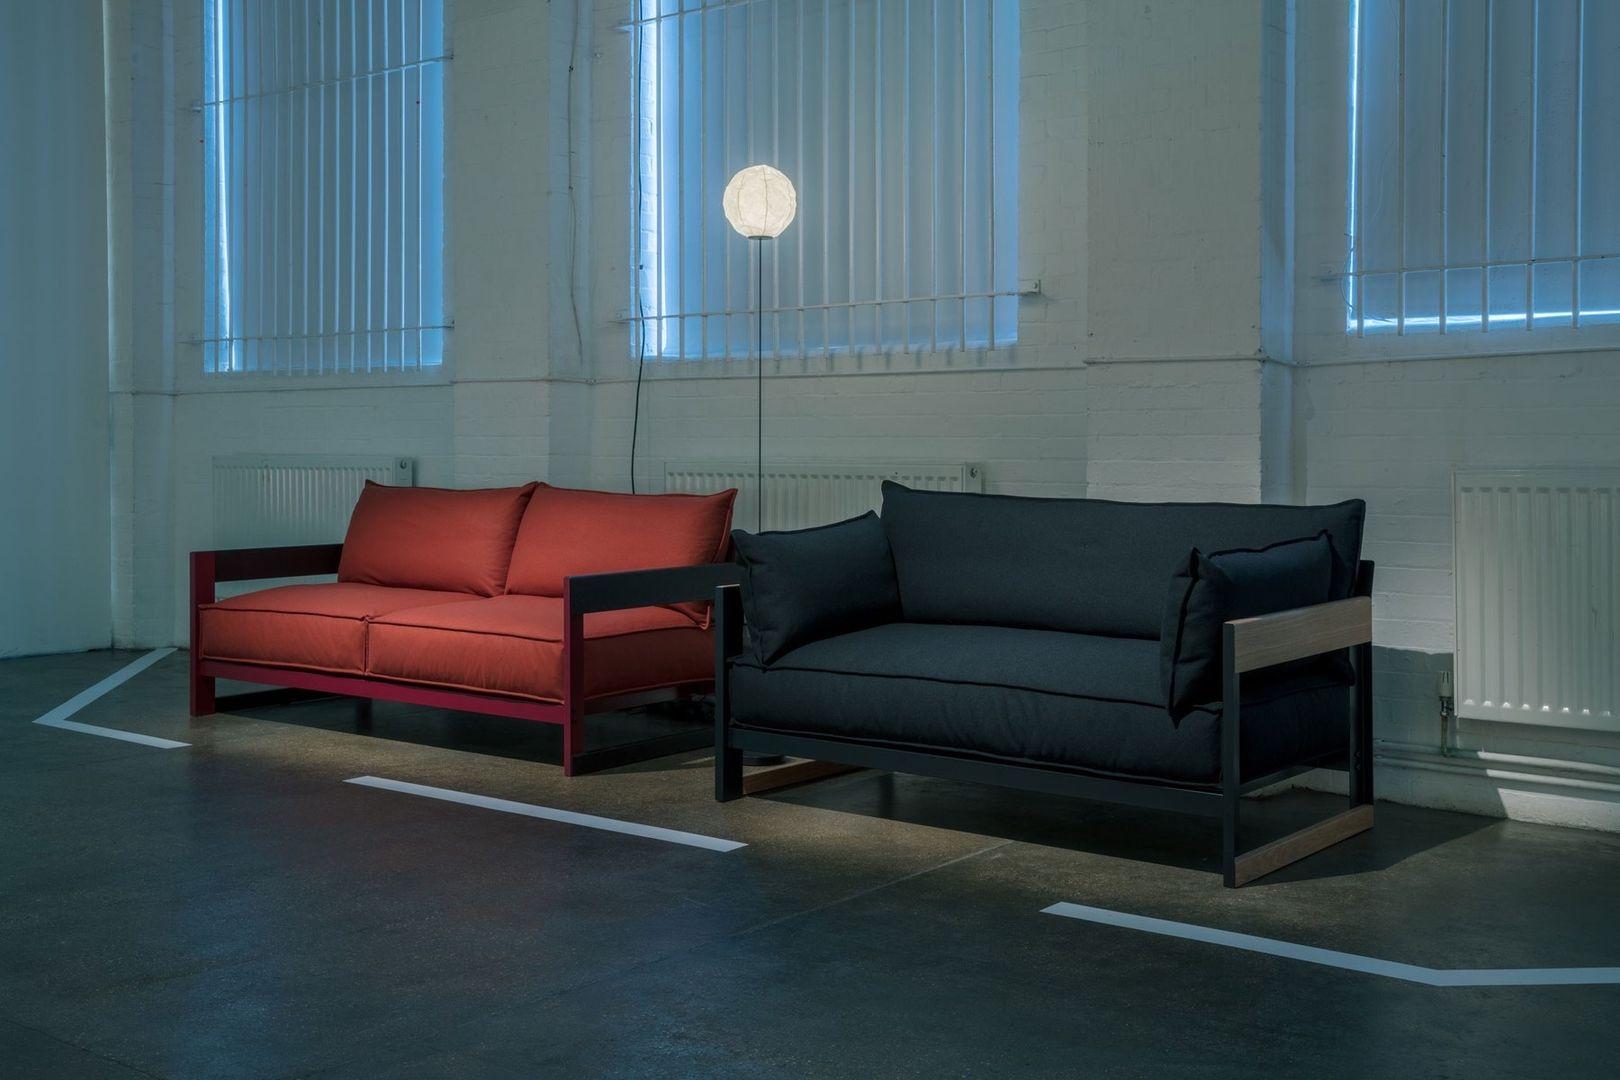 Bringing together contrasting materials and a simple form, Ronan and Erwan Bouroullec have created a statement two and three-seater sofa that is also a welcoming retreat. The wide panels of the powder-coated metal frame feature a slim edge profile,